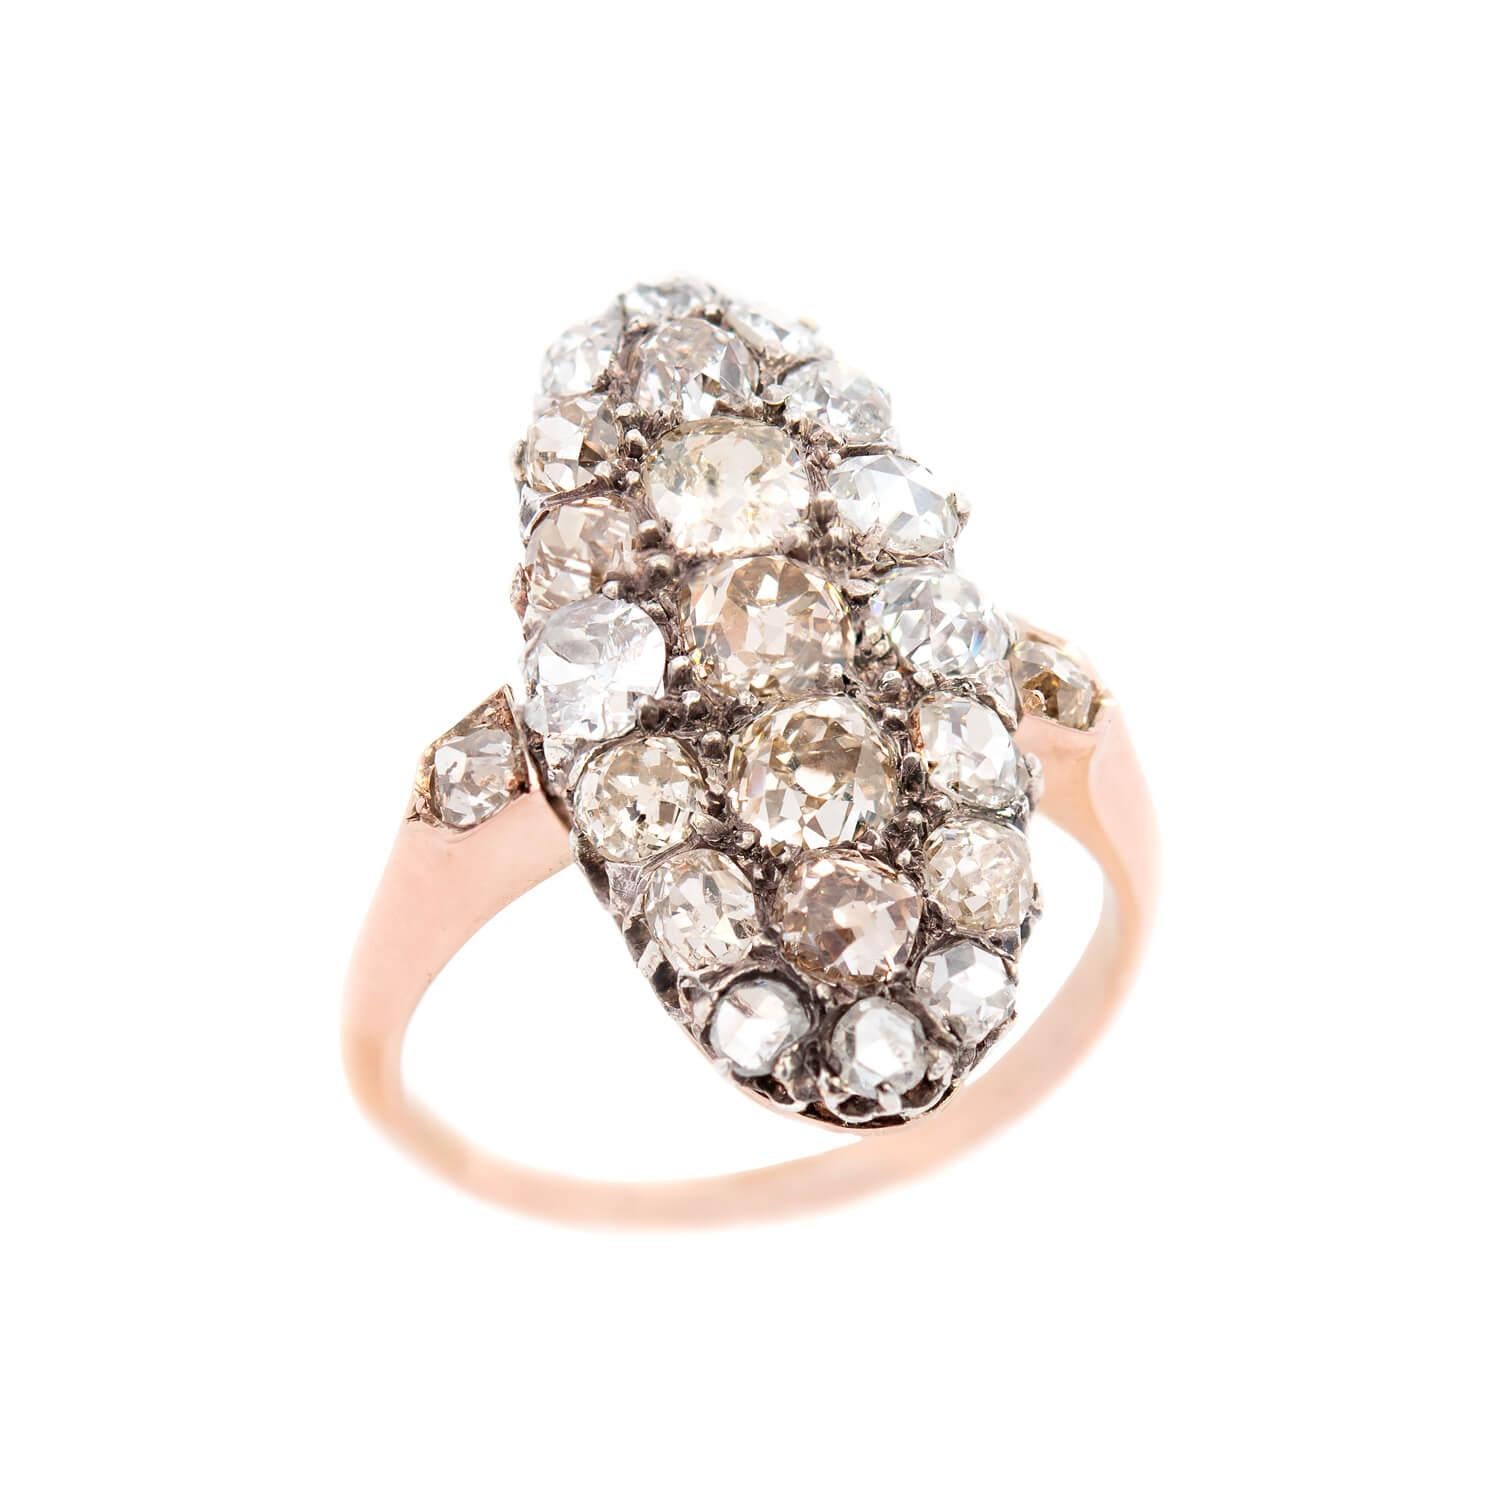 A gorgeous ring from the Edwardian (1900) era! Crafted in 18K and platinum topped this ring adorns 23 Old Mine Cut and Rose Cut diamonds totaling 2.75ctw. The mixture of natural old cuts that range in color from H-light fancy make this ring sparkle!